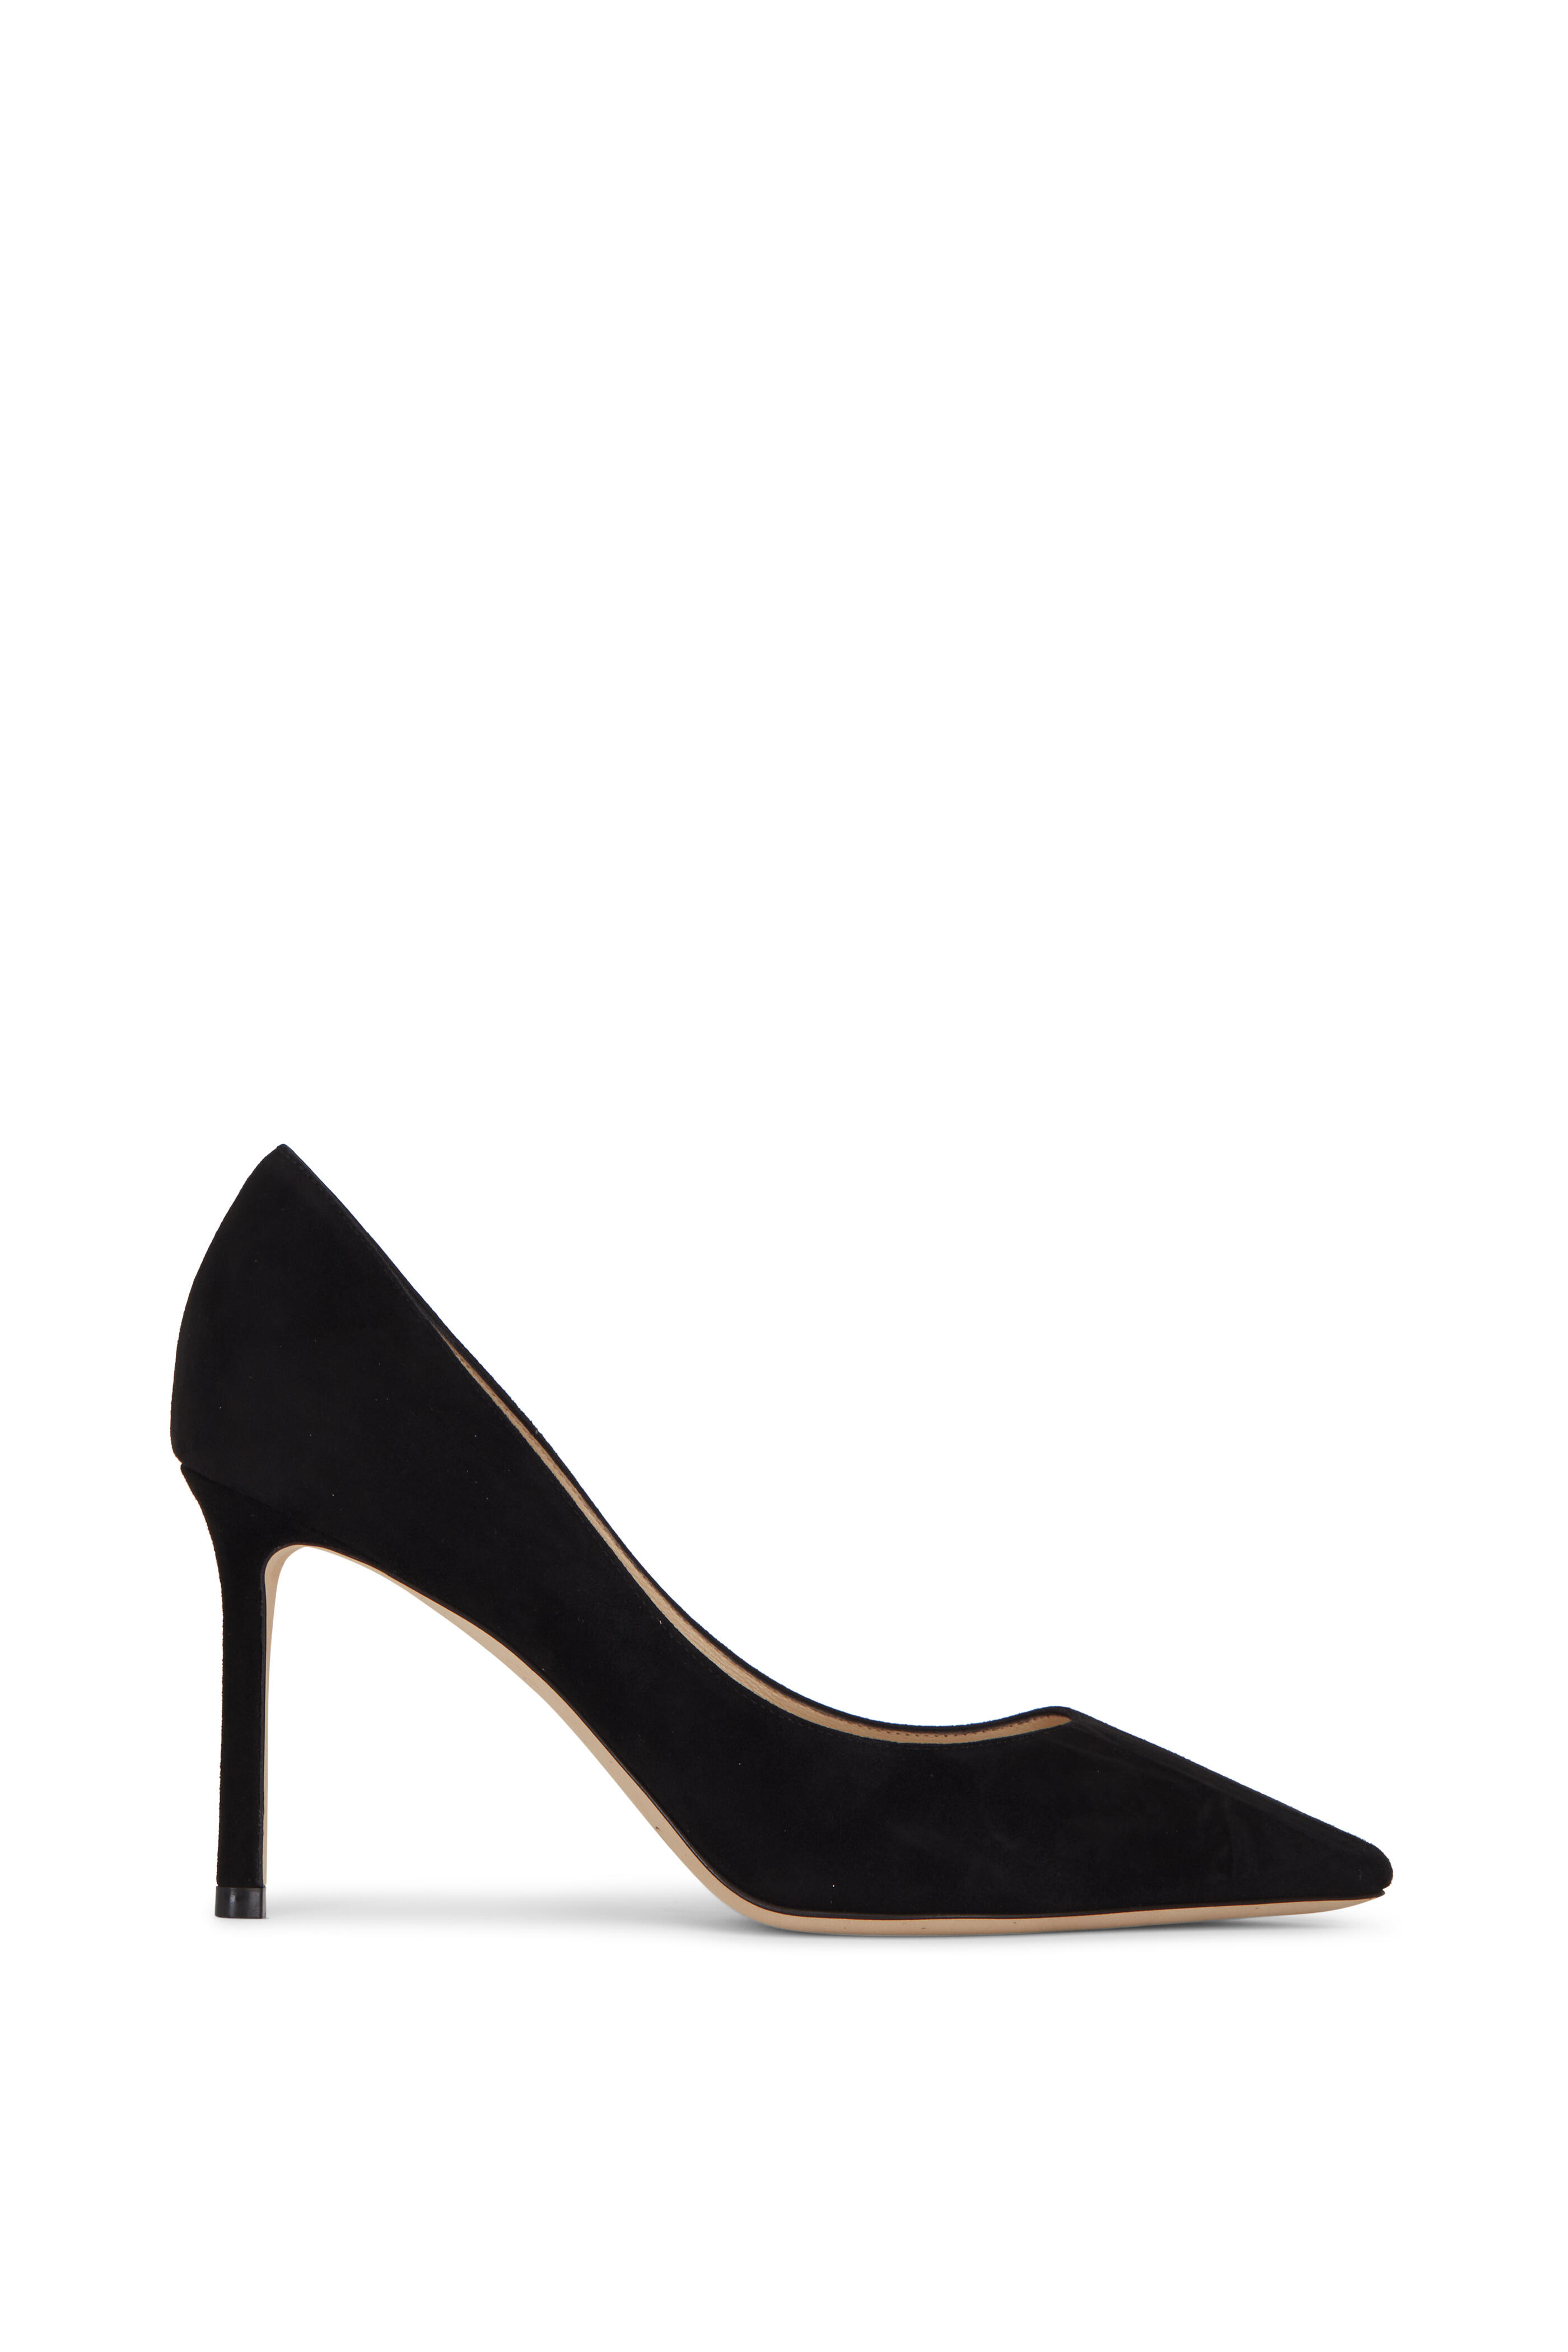 Jimmy Choo - Romy Black Suede Pump, 85mm | Mitchell Stores